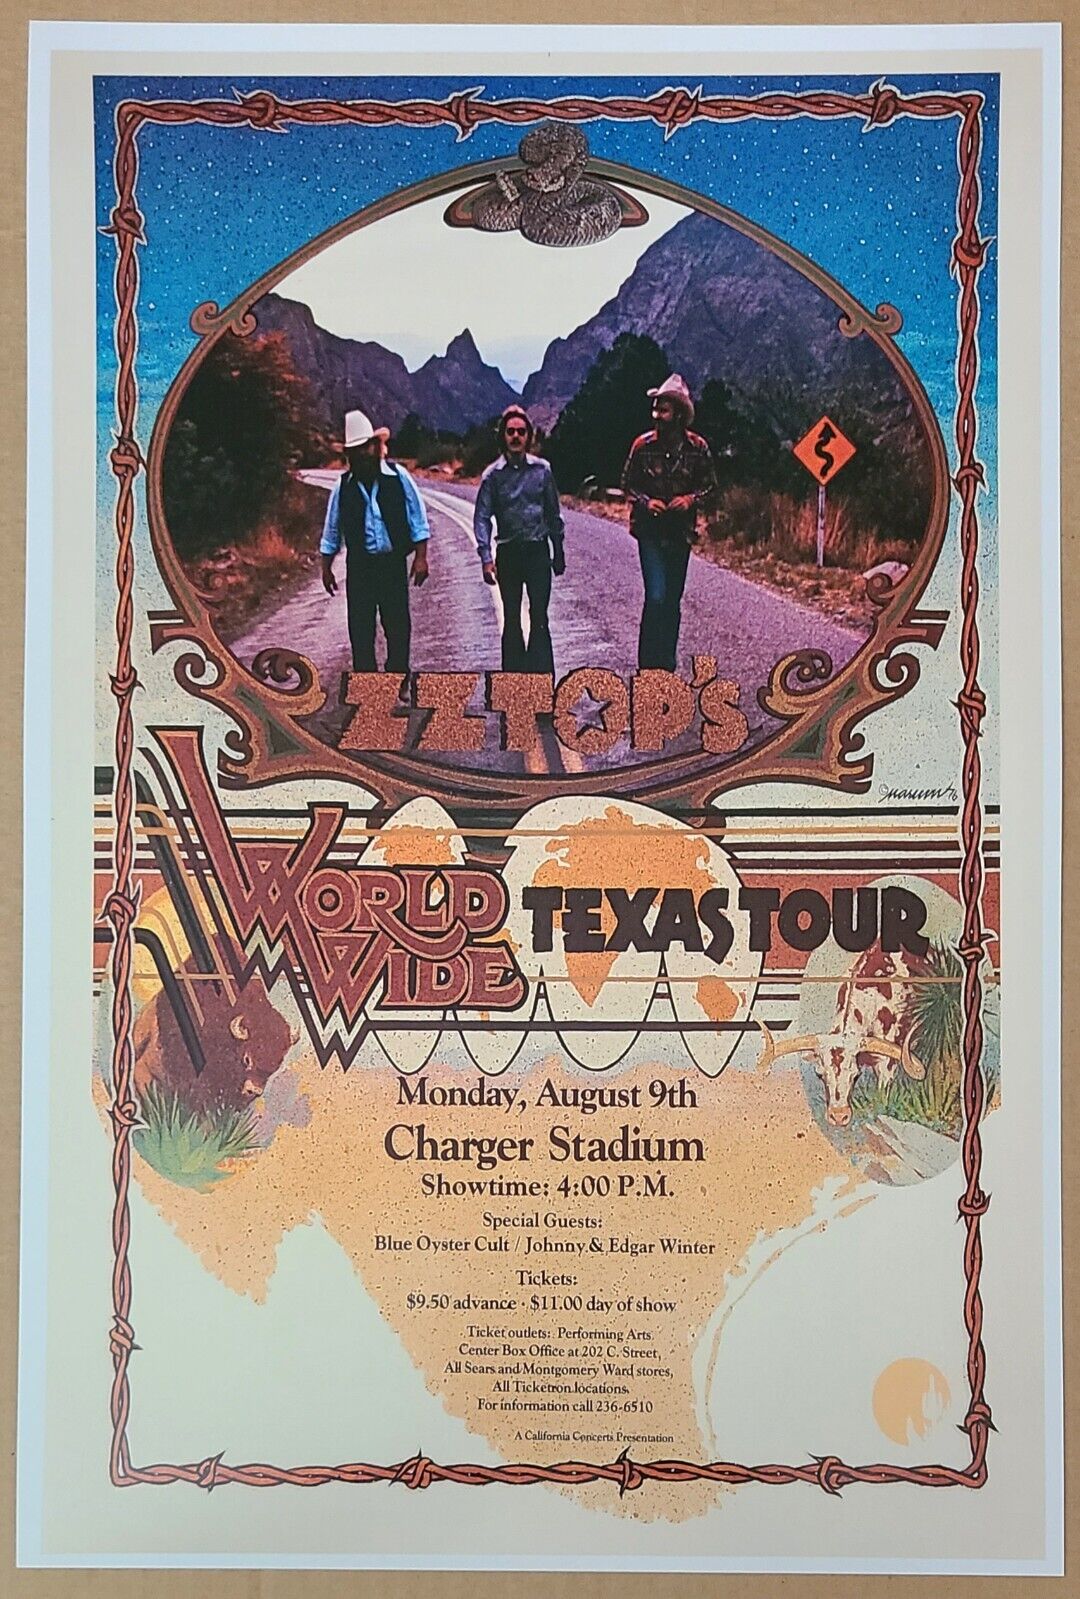 Zz Top World Wide Texas Tour Charger Stadium Aug. 9 Glossy 12x18 Concert Poster